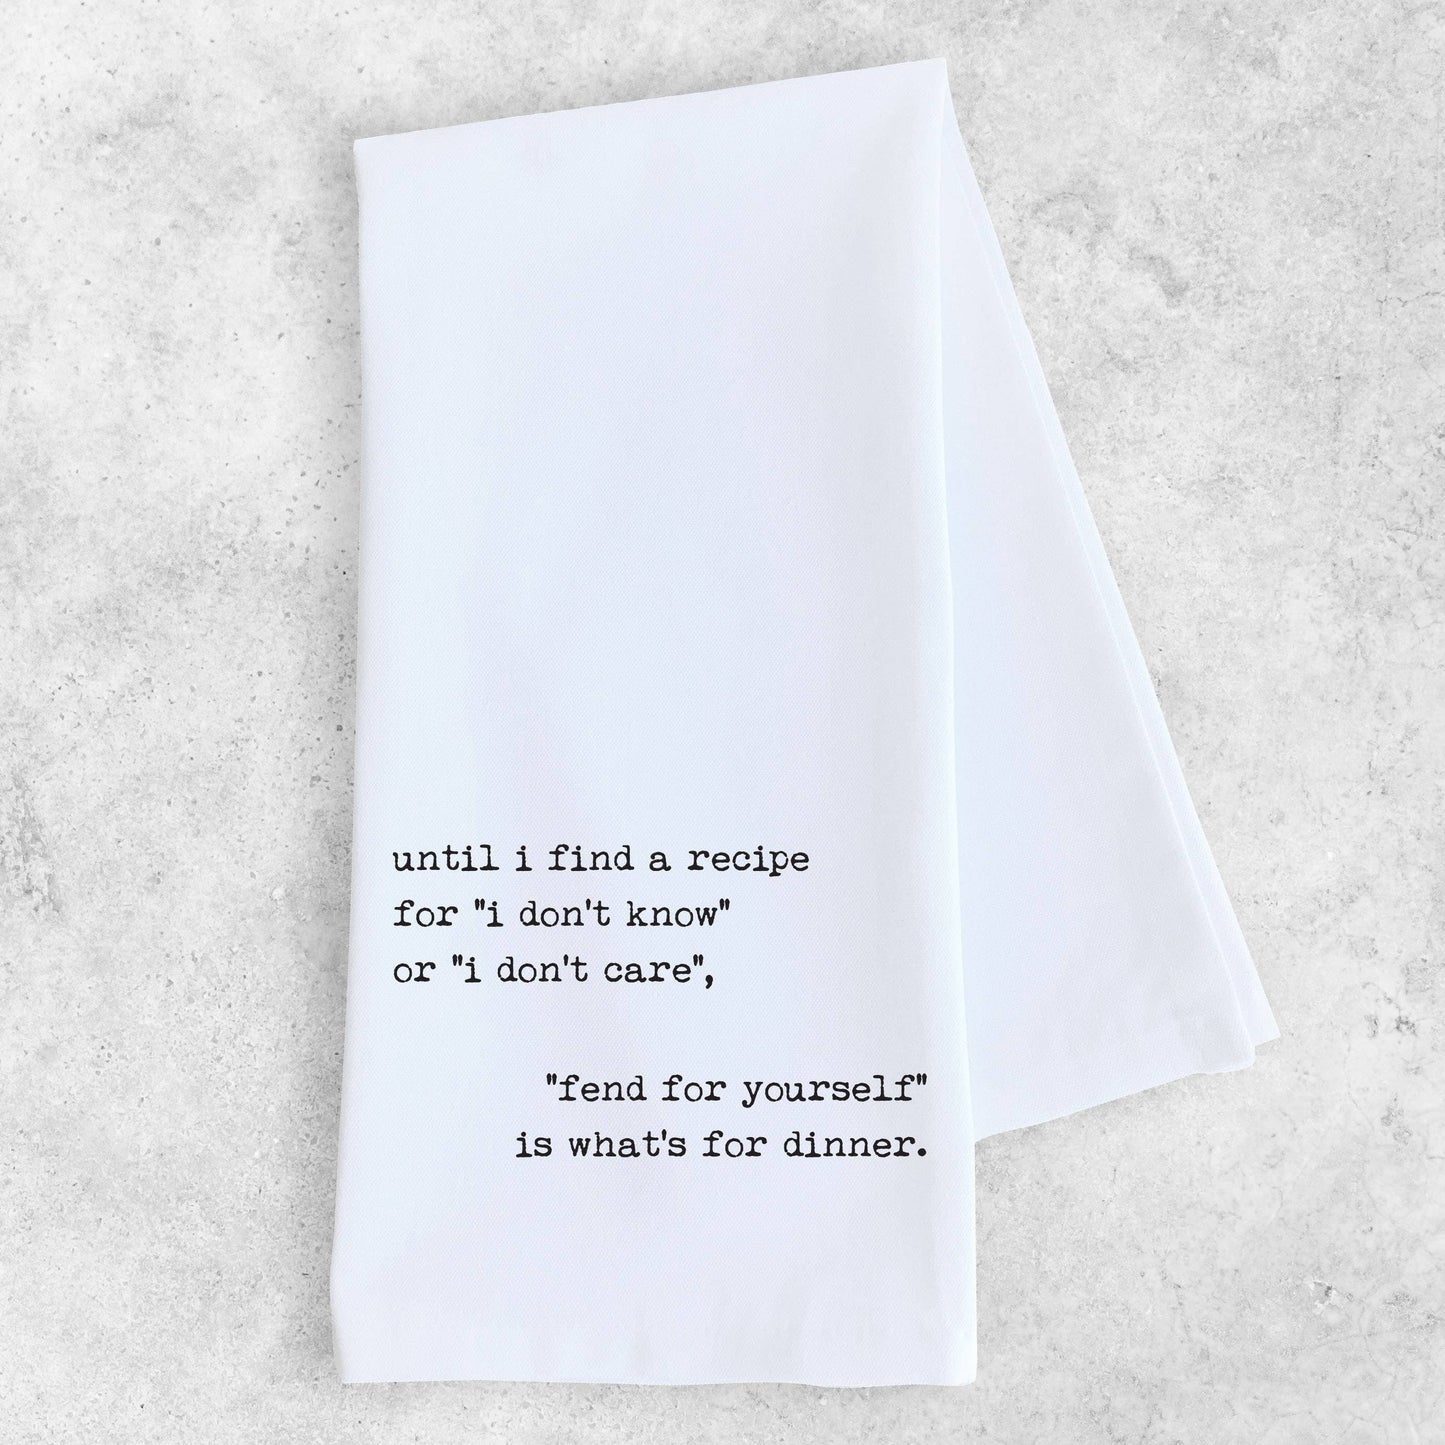 Fend For Yourself It's What's For Dinner - Tea Towel